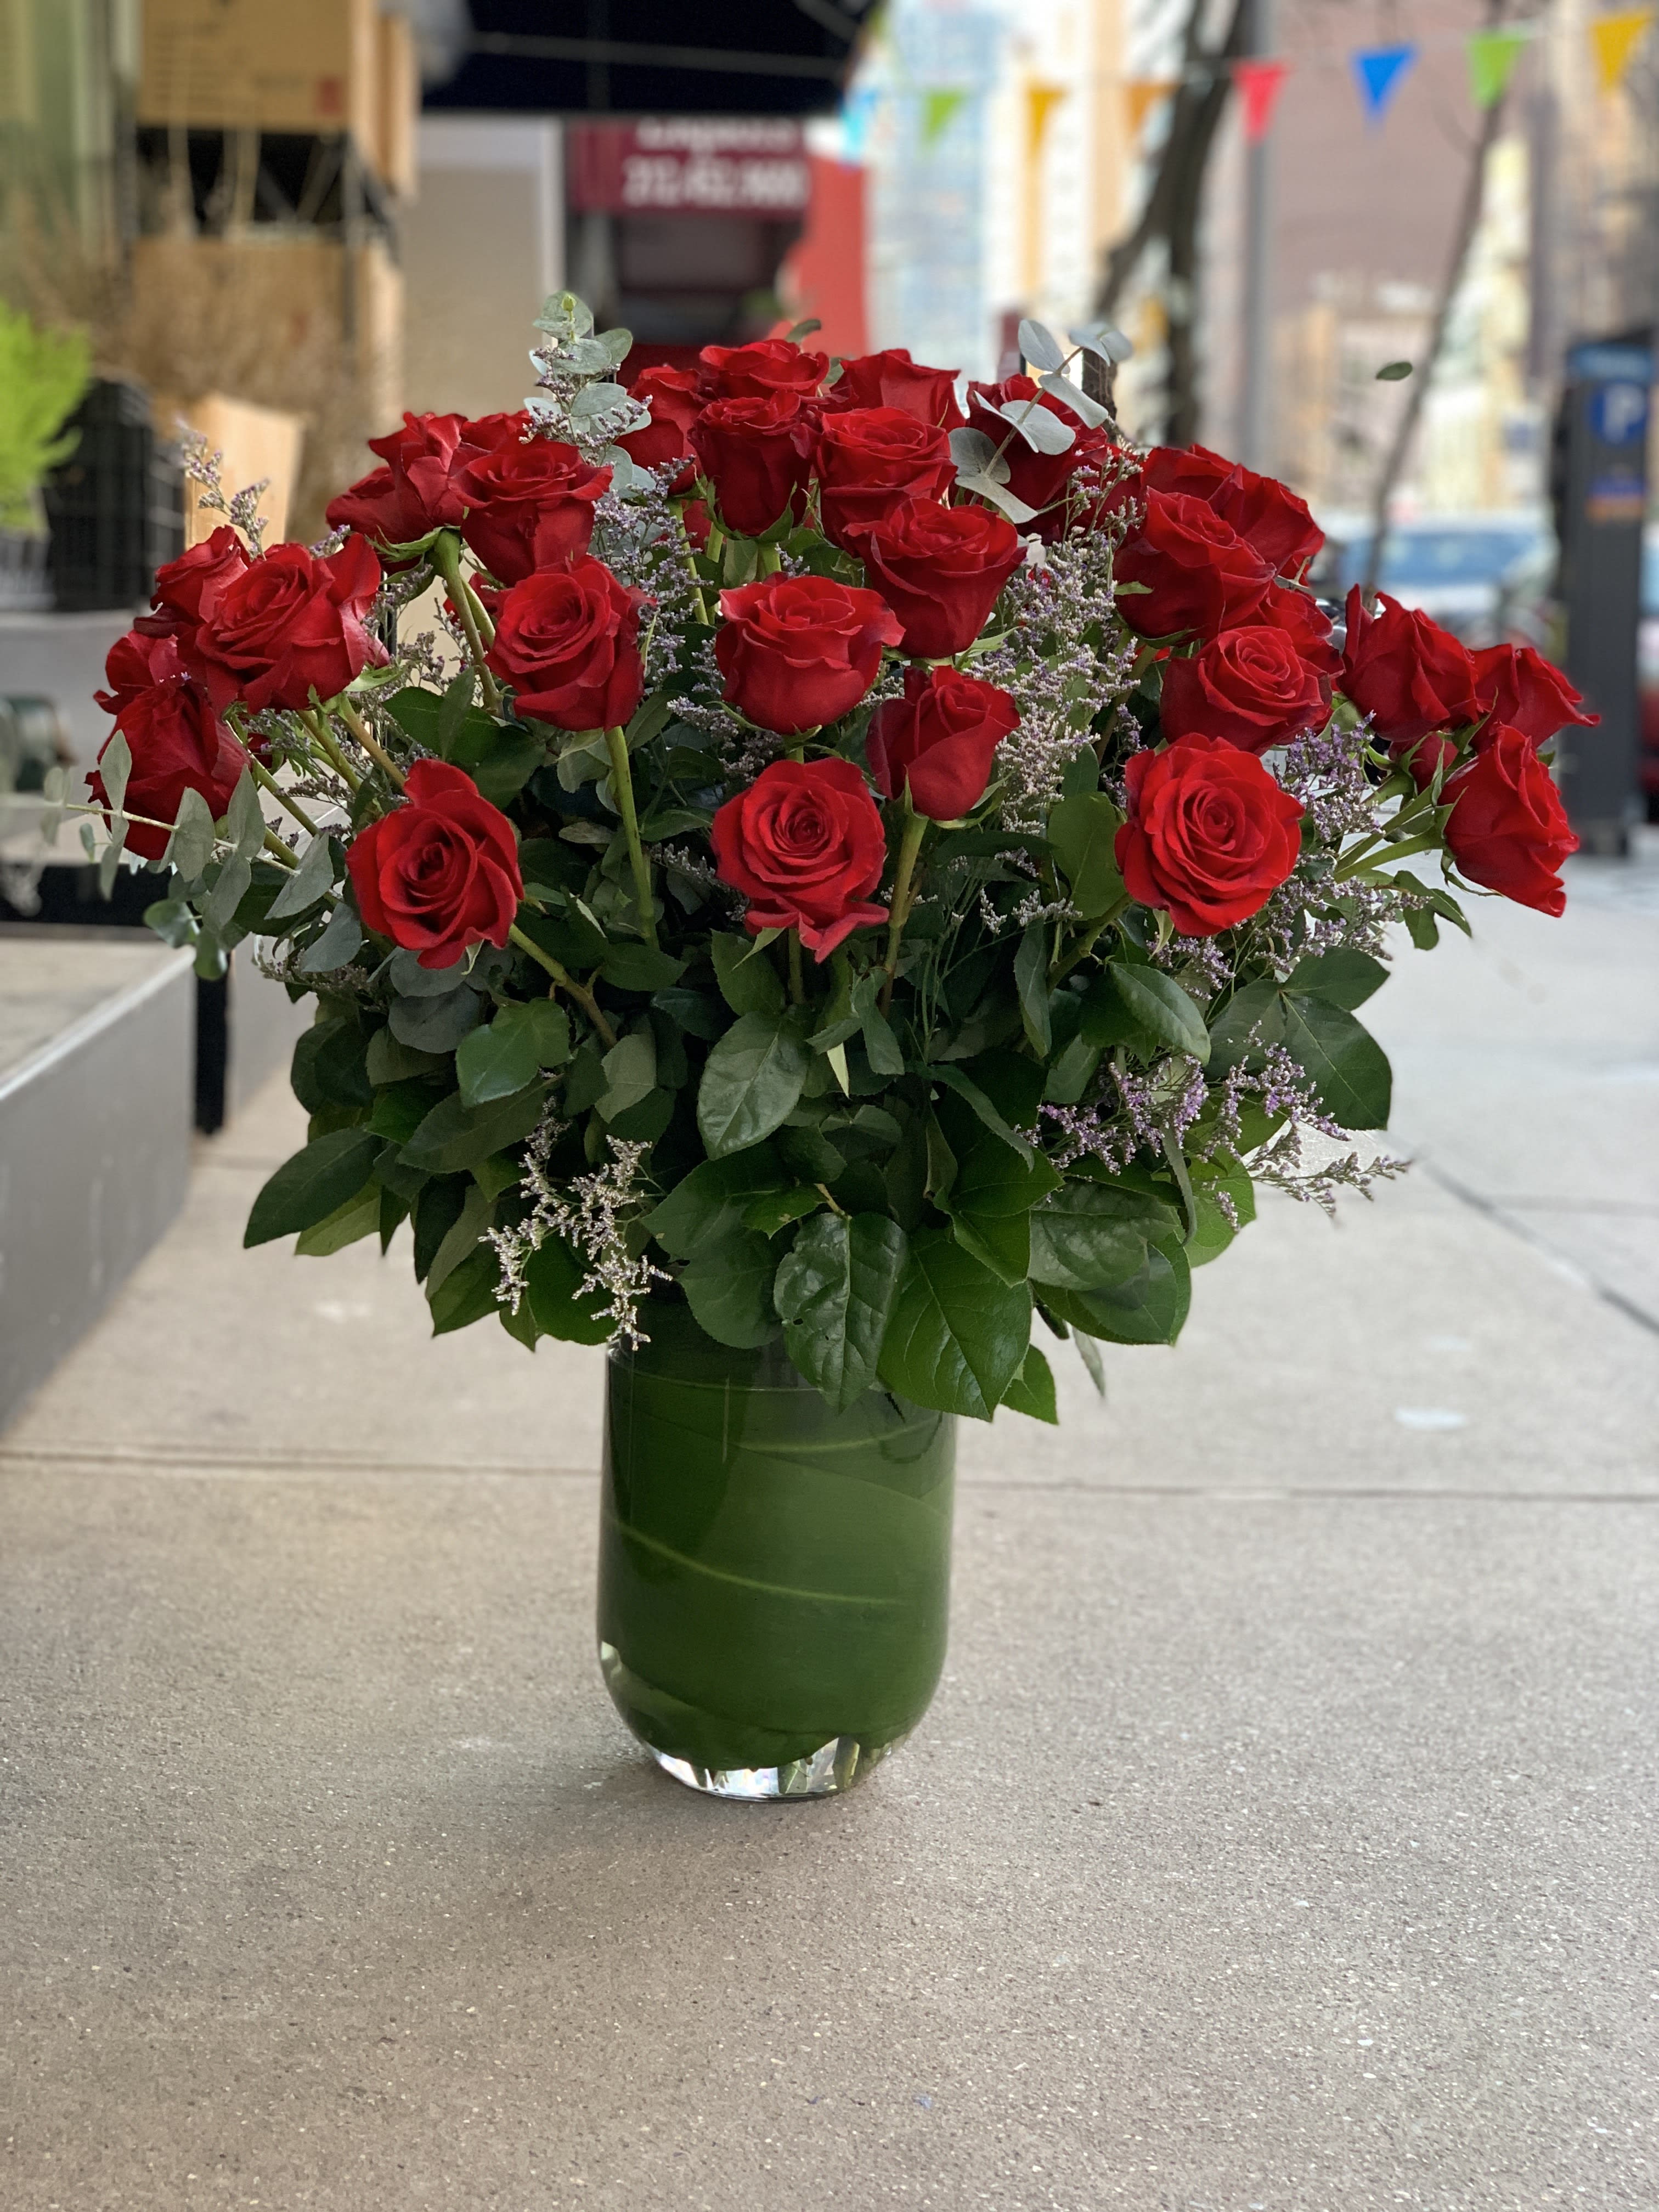 Three Dozen Red Roses - Three Dozen Classic long stem roses. Arranged in a tall vase with greenery, petite flowers  or branches to add extra volume that create a huge impact! Available in Red, White, Pink, Purple, Yellow, and Apricot